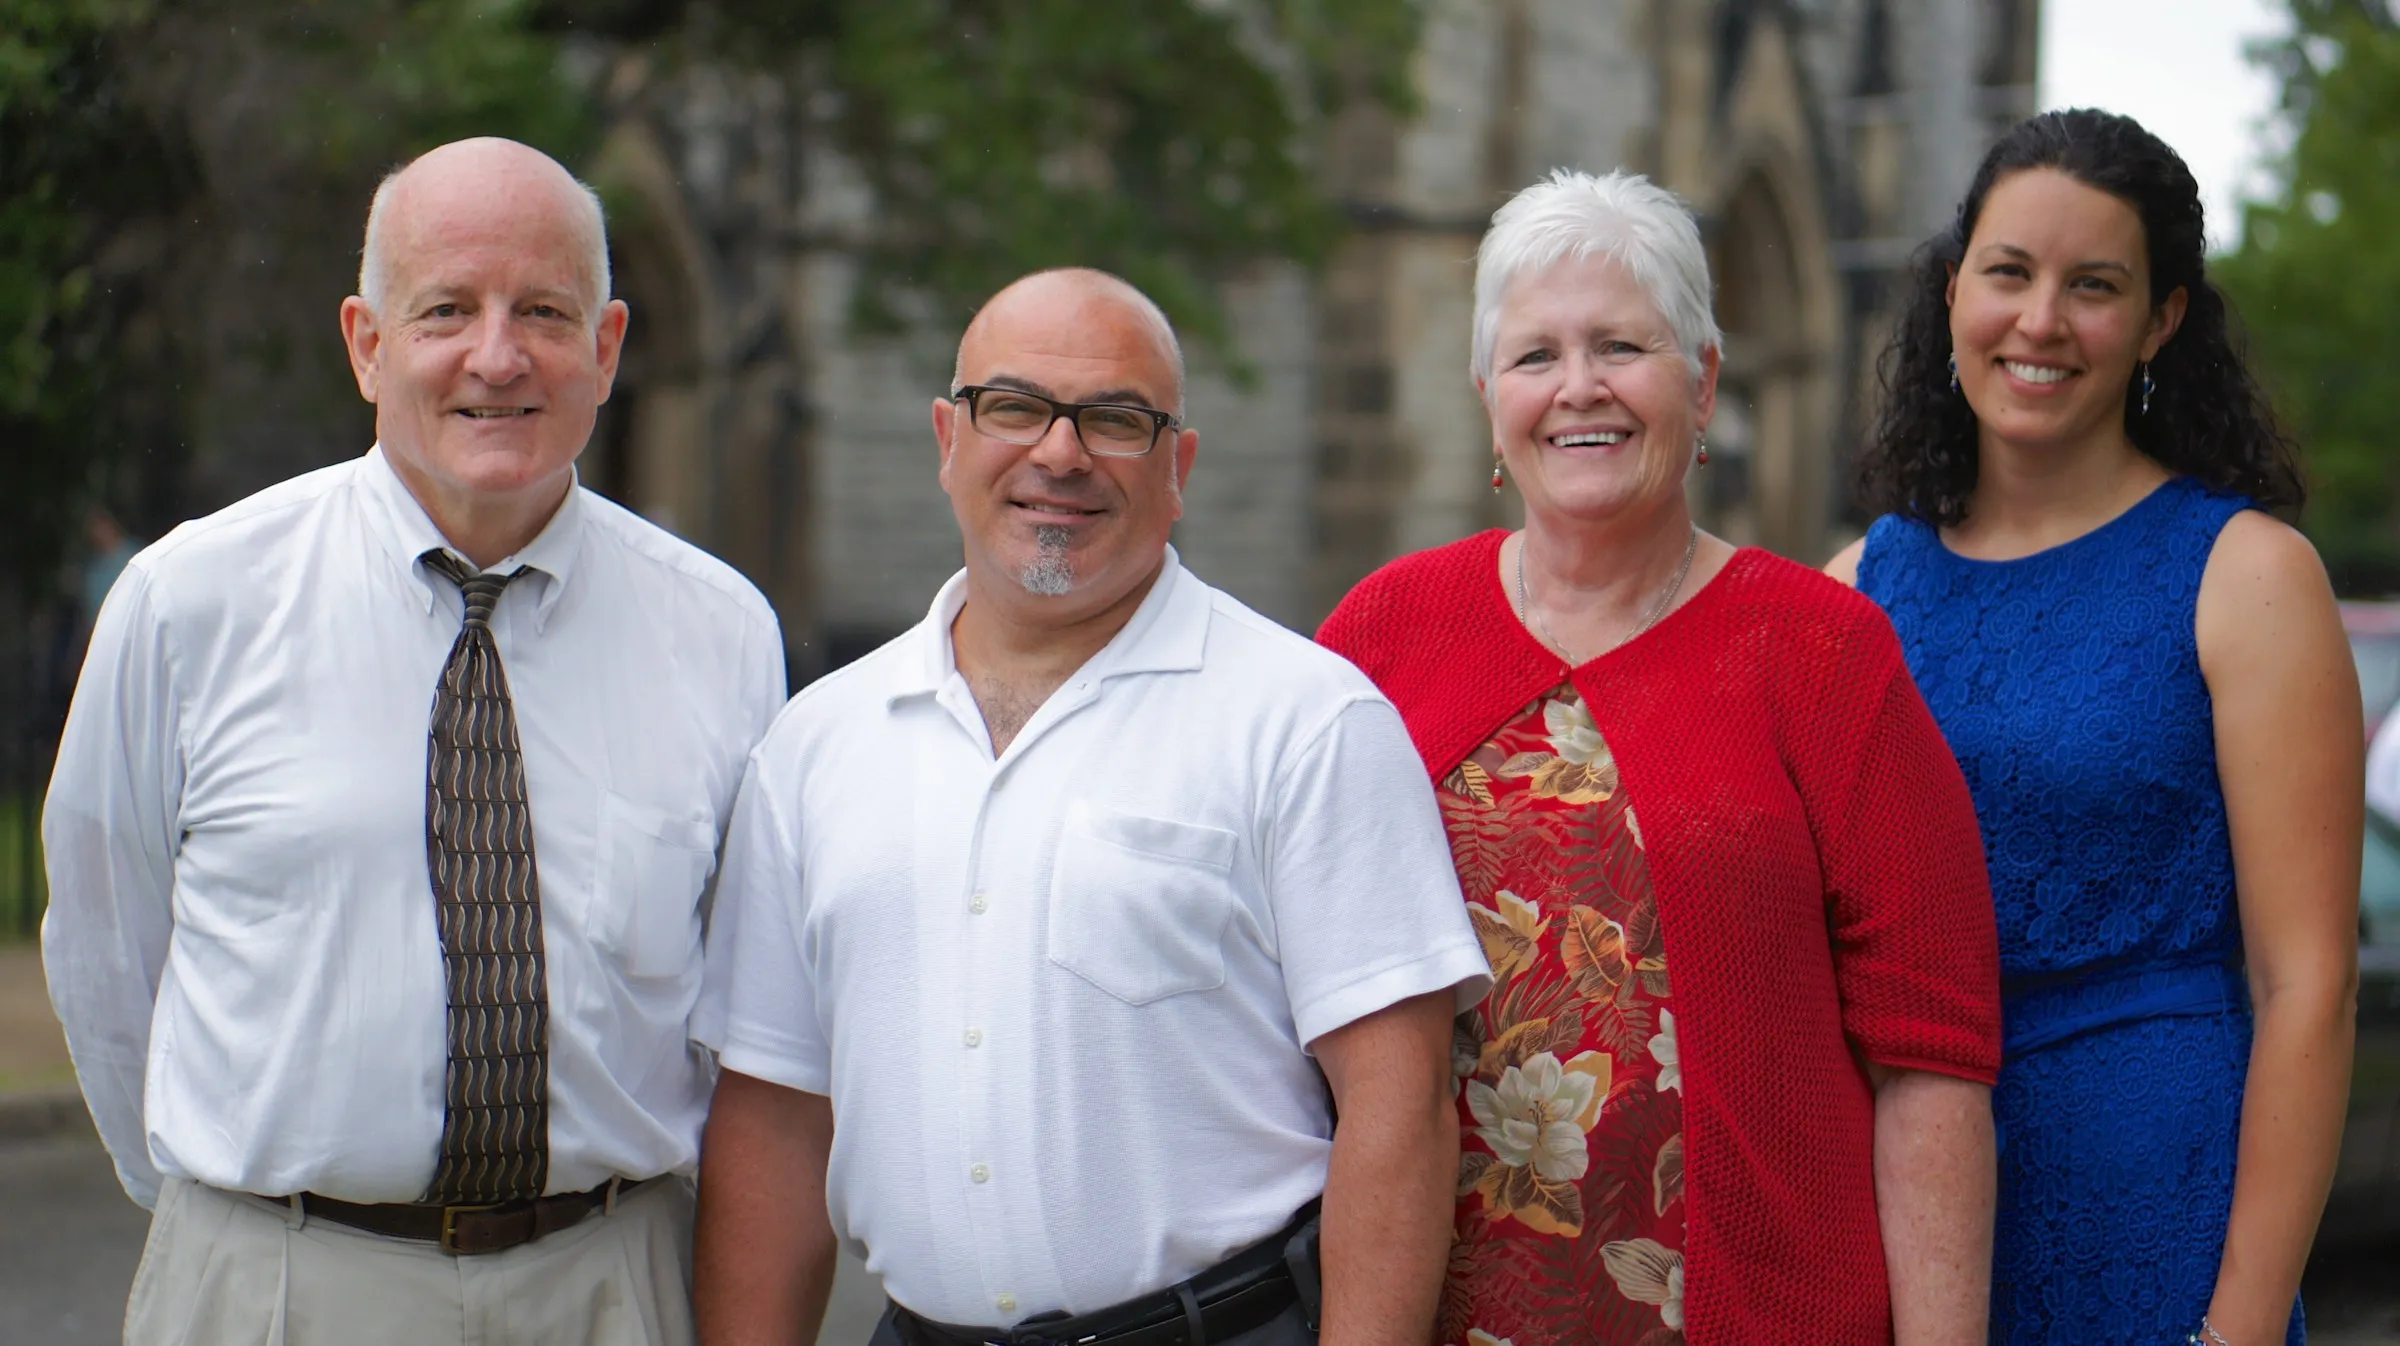 Detroit Mass Mob organizers, left to right, Thom Mann, Anthony Battaglia, the late Annamarie Barnes, and Teresa Chisholm stand outside St. Joseph Church in Detroit on June 29, 2014. Not pictured is organizer Jeff Stawasz. Photo courtesy of Detroit Catholic/Tim Hinkle